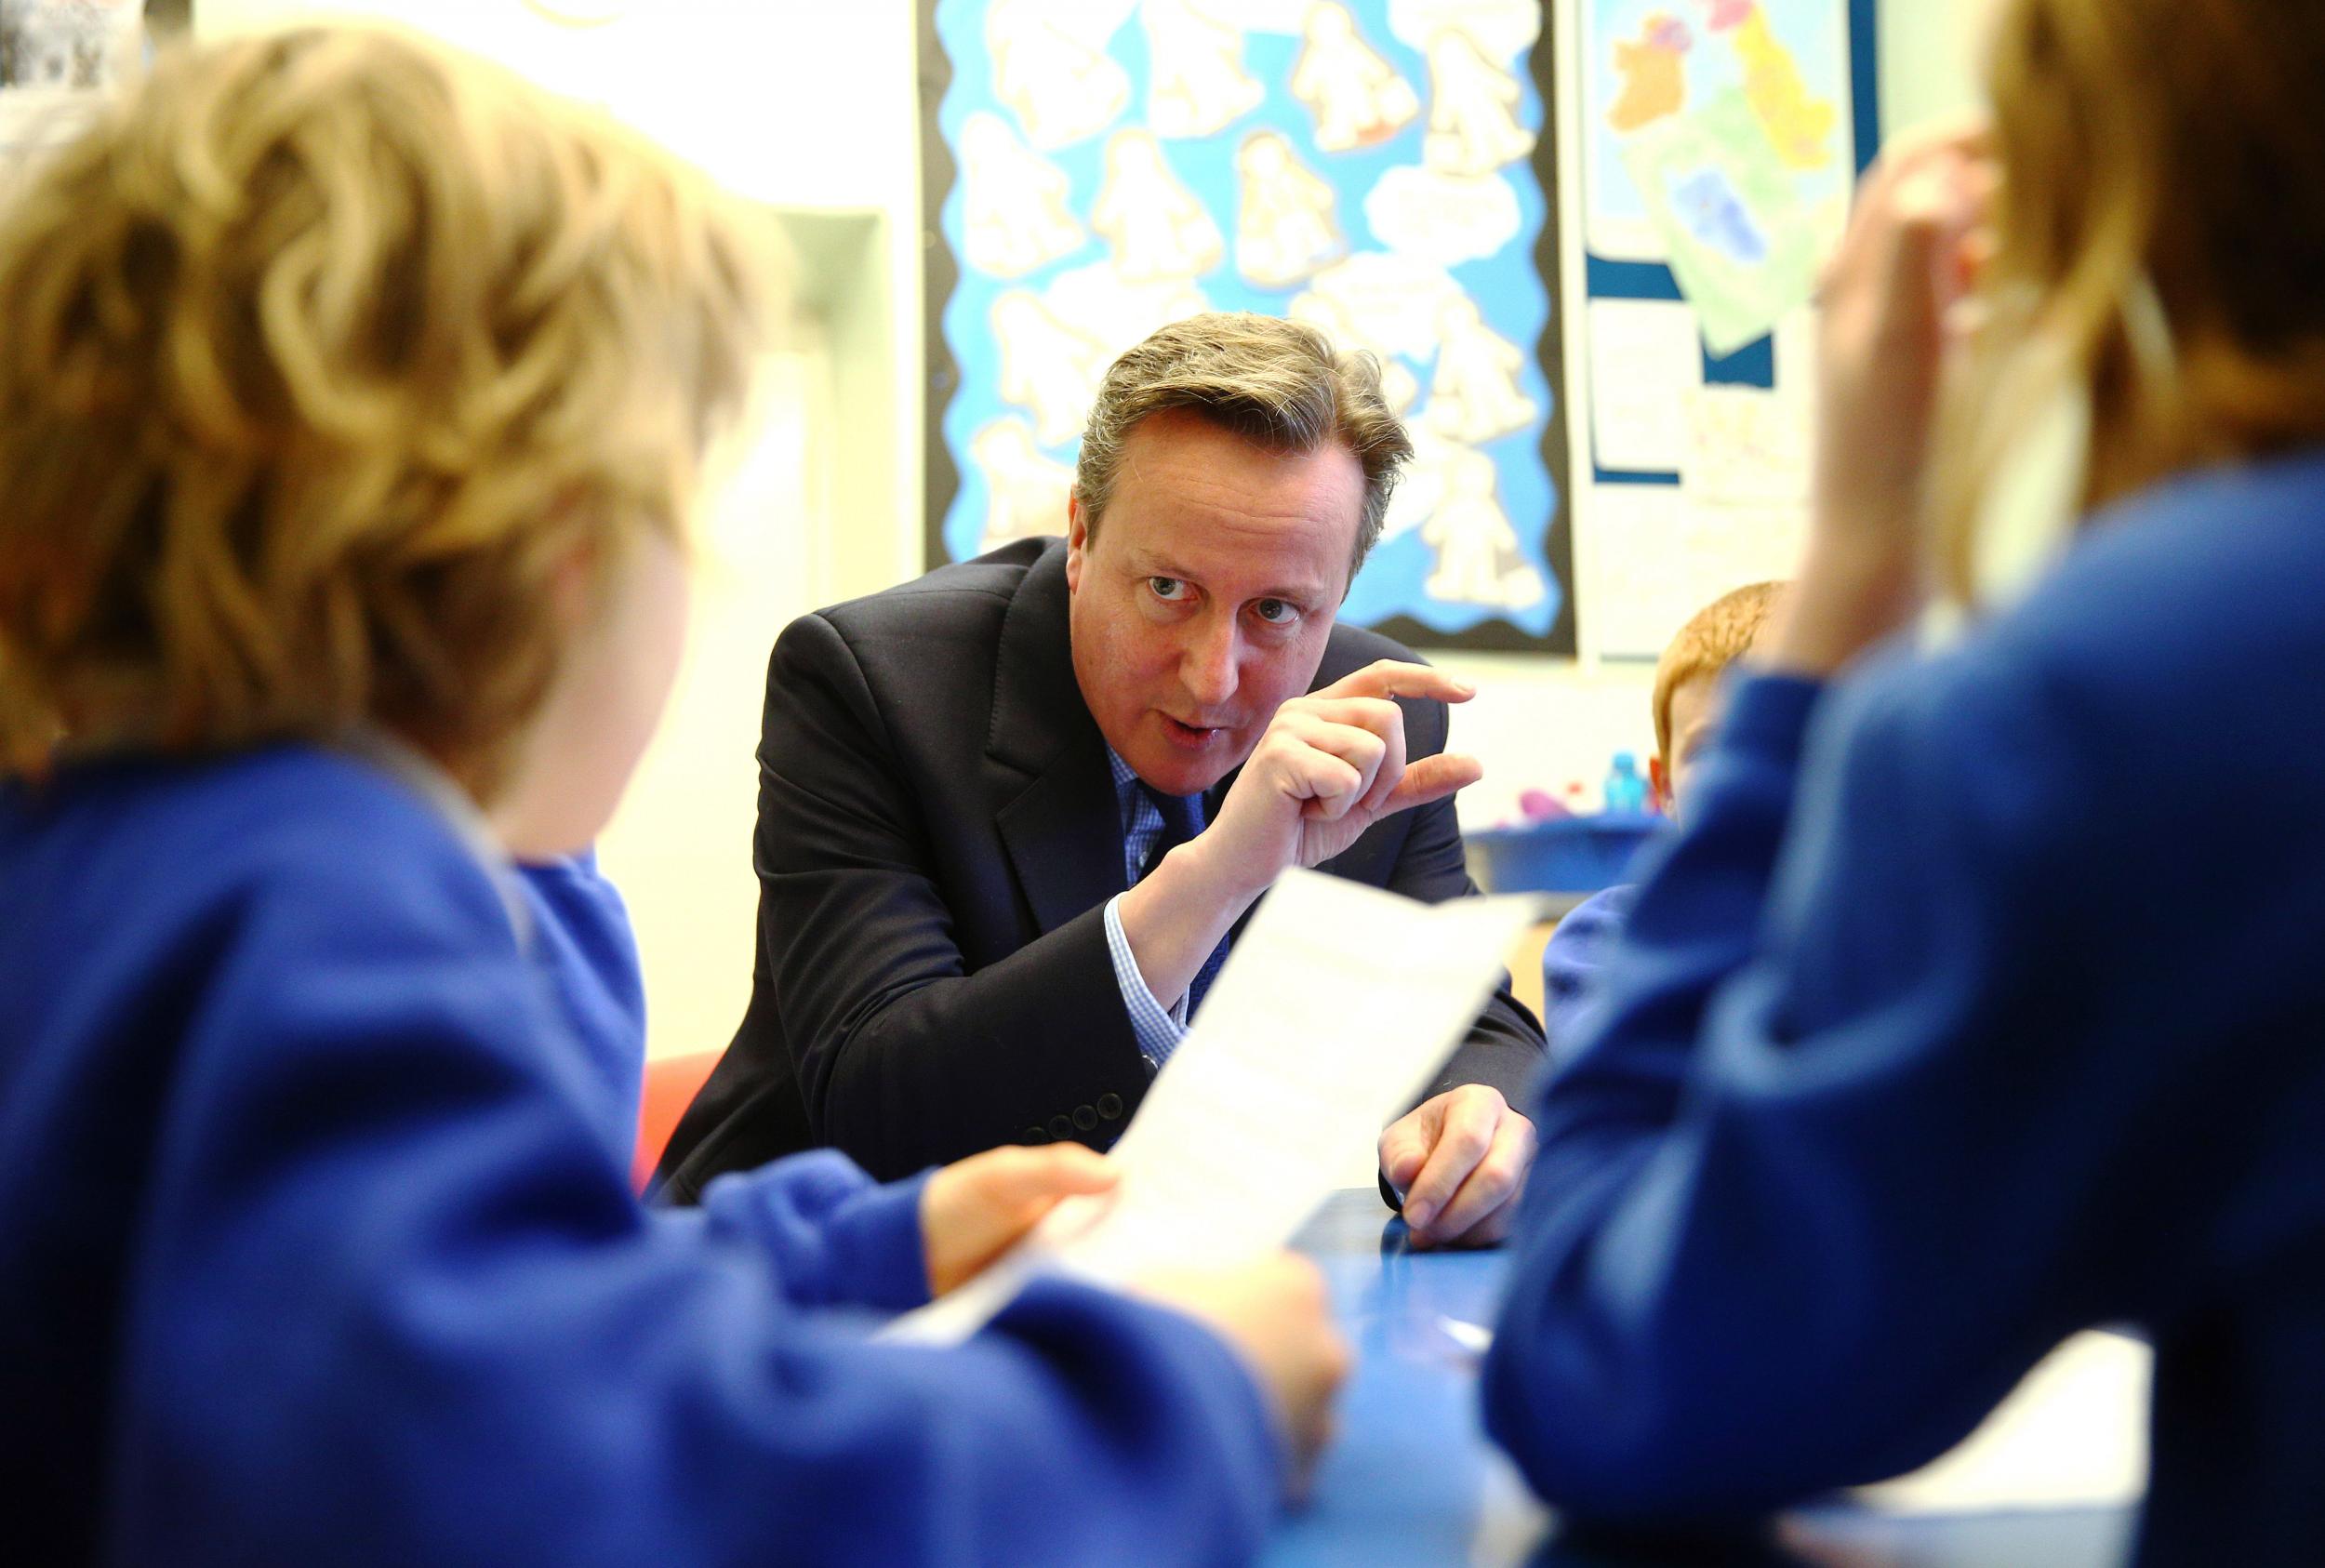 New data reveals where children can best thrive in Cameron's Britain.